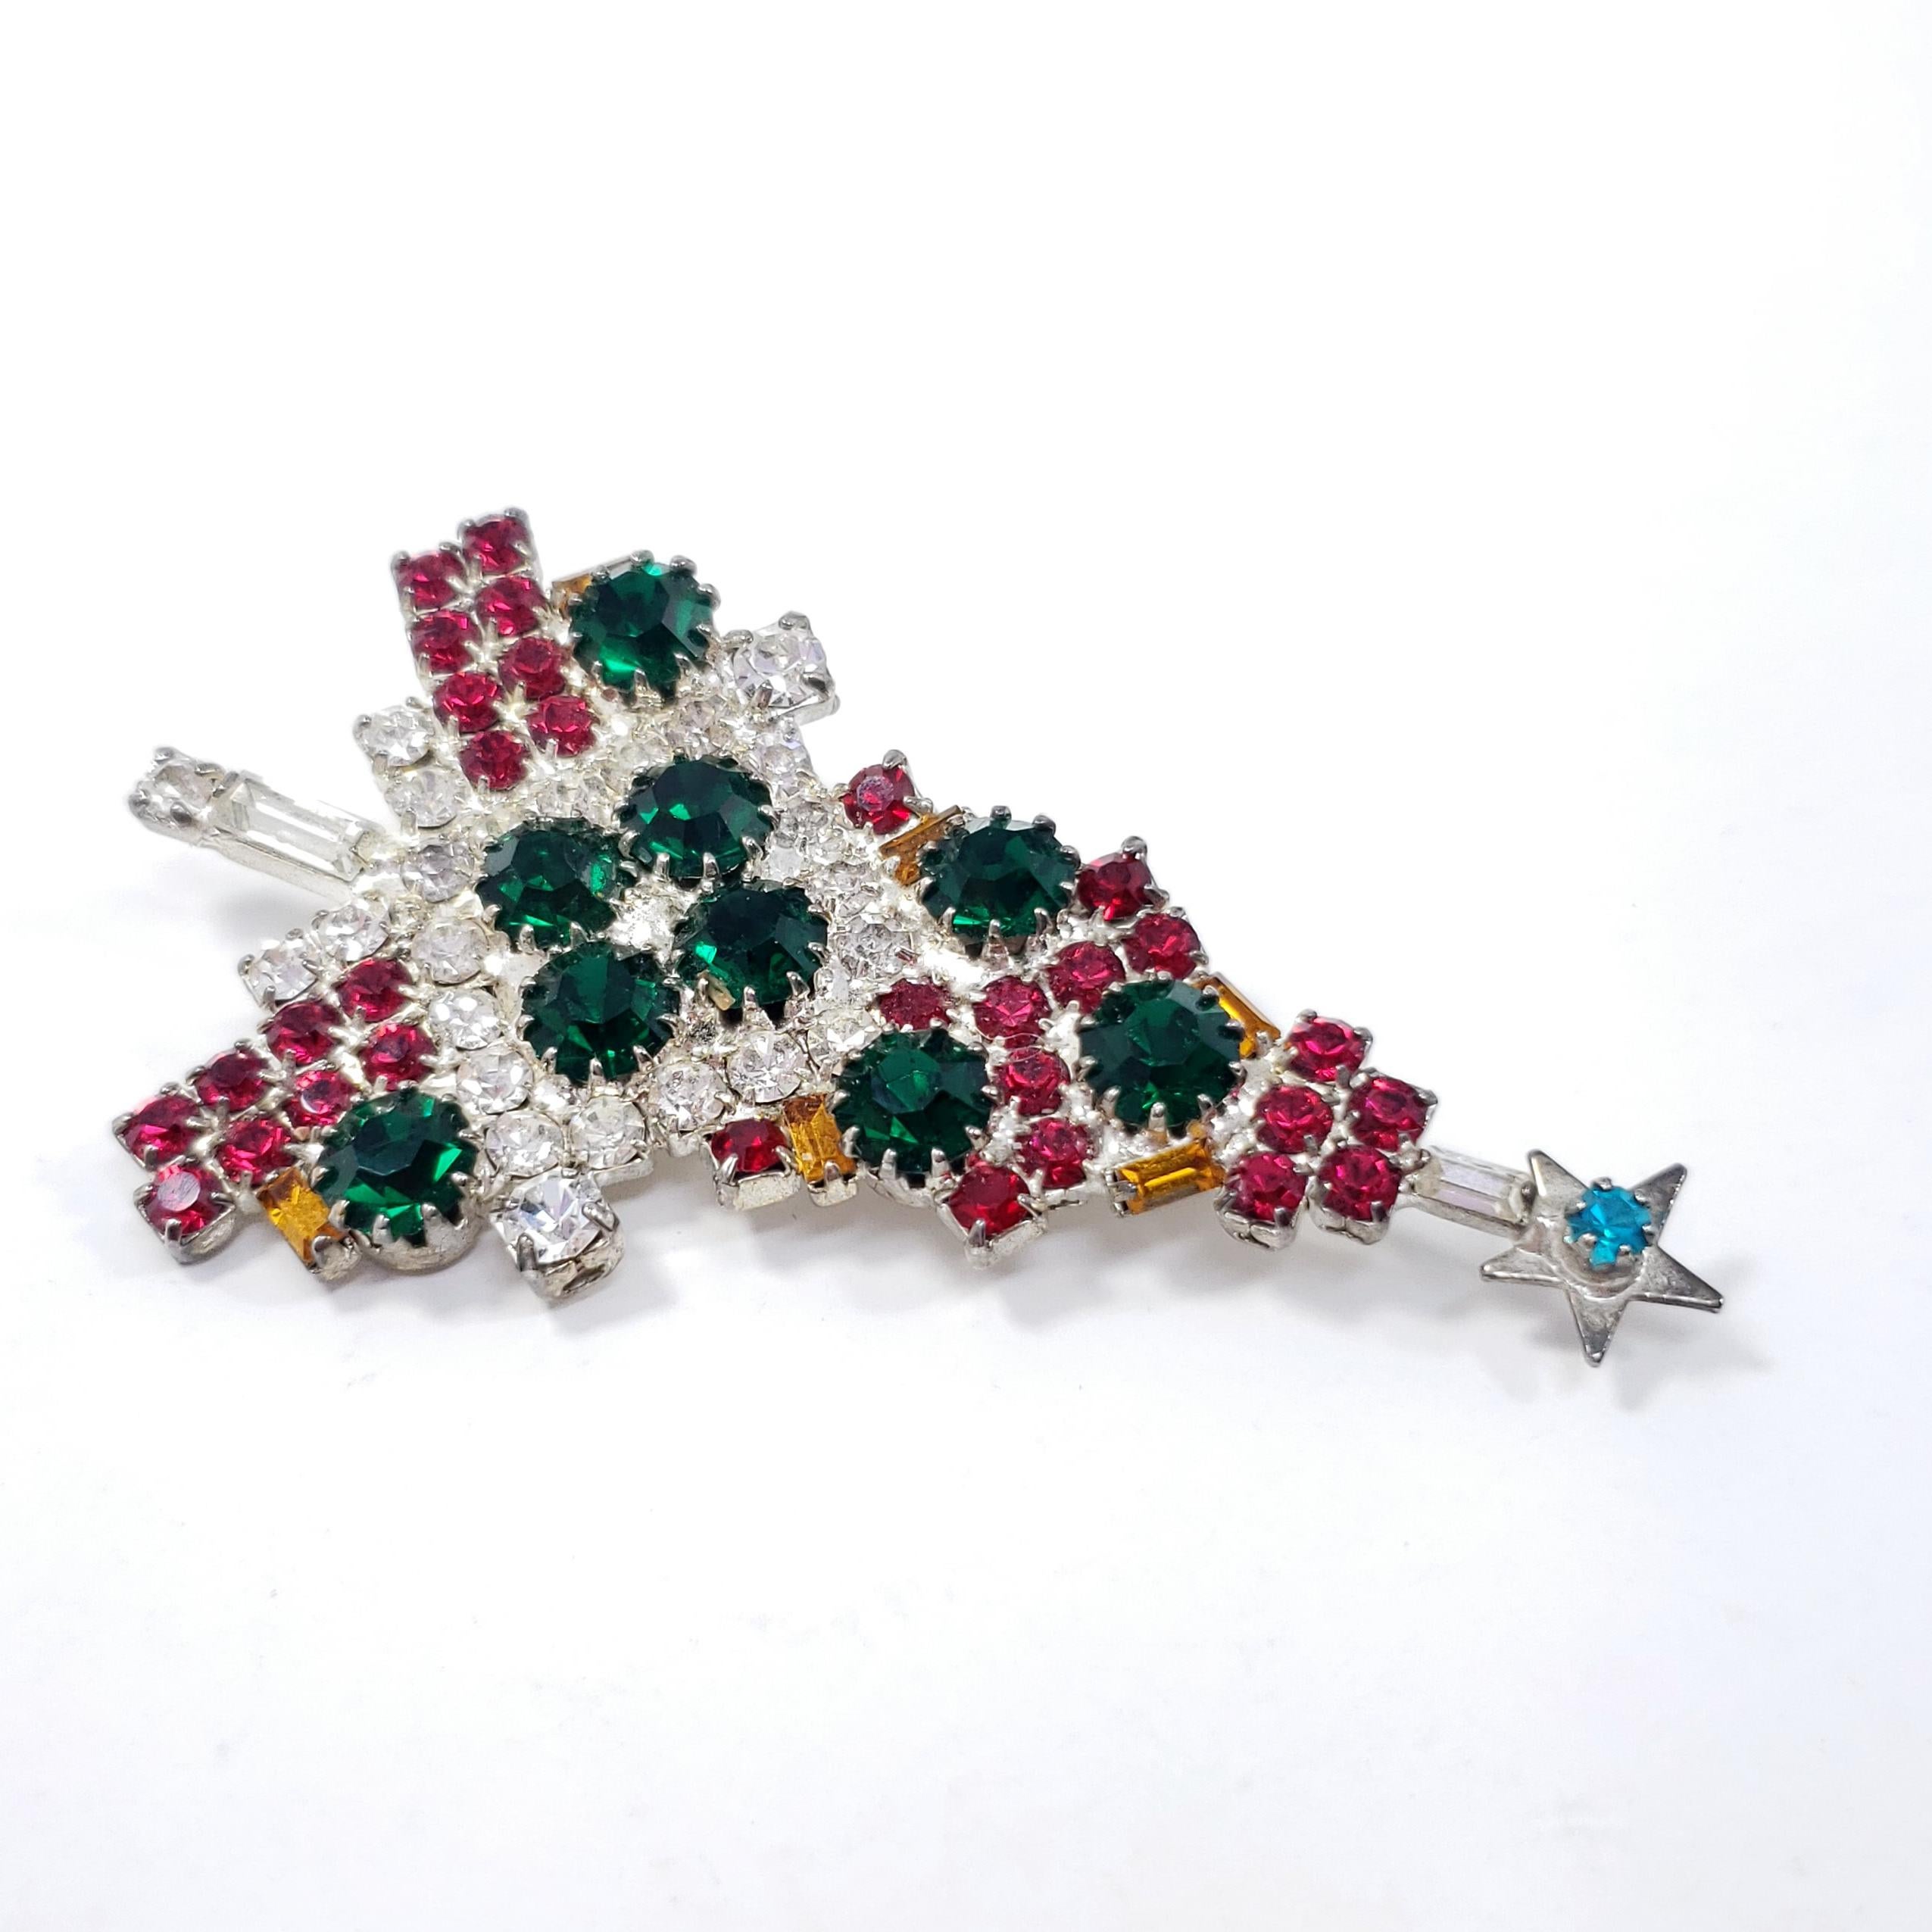 A dazzling Christmas tree, decorated with festive red, green, and clear crystals. A stylish holiday accessory!

Silver-tone. Prong-set crystals.